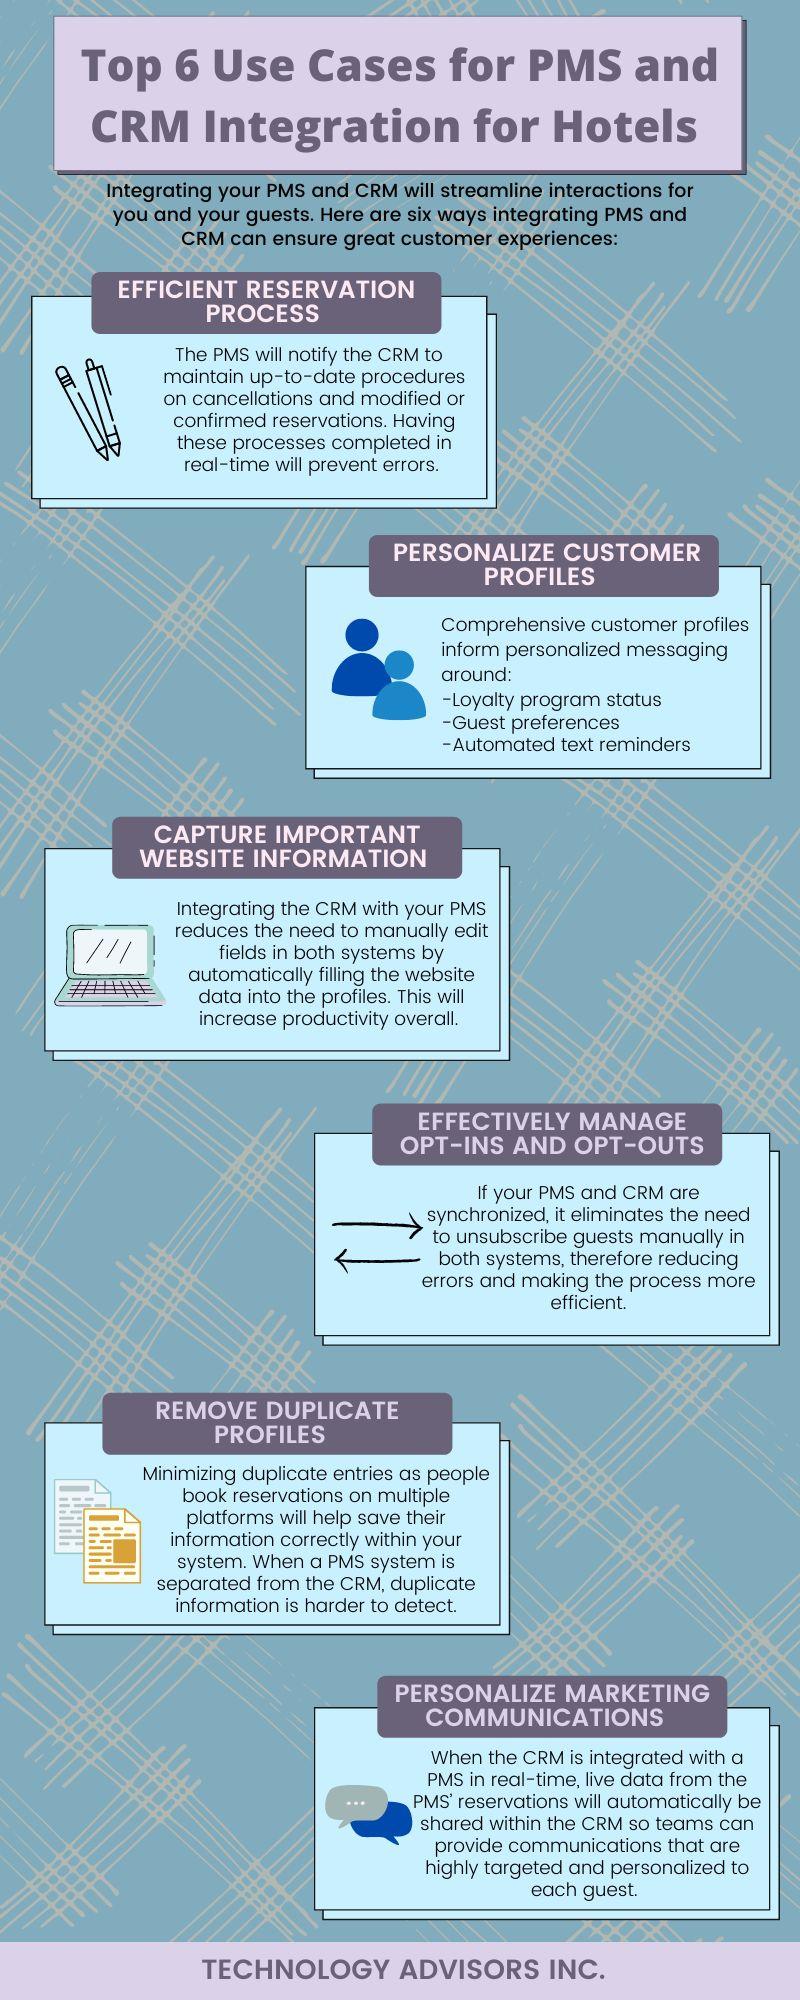 [INFOGRAPHIC] Top 6 Use Cases for PMS and CRM Integration for Hotels